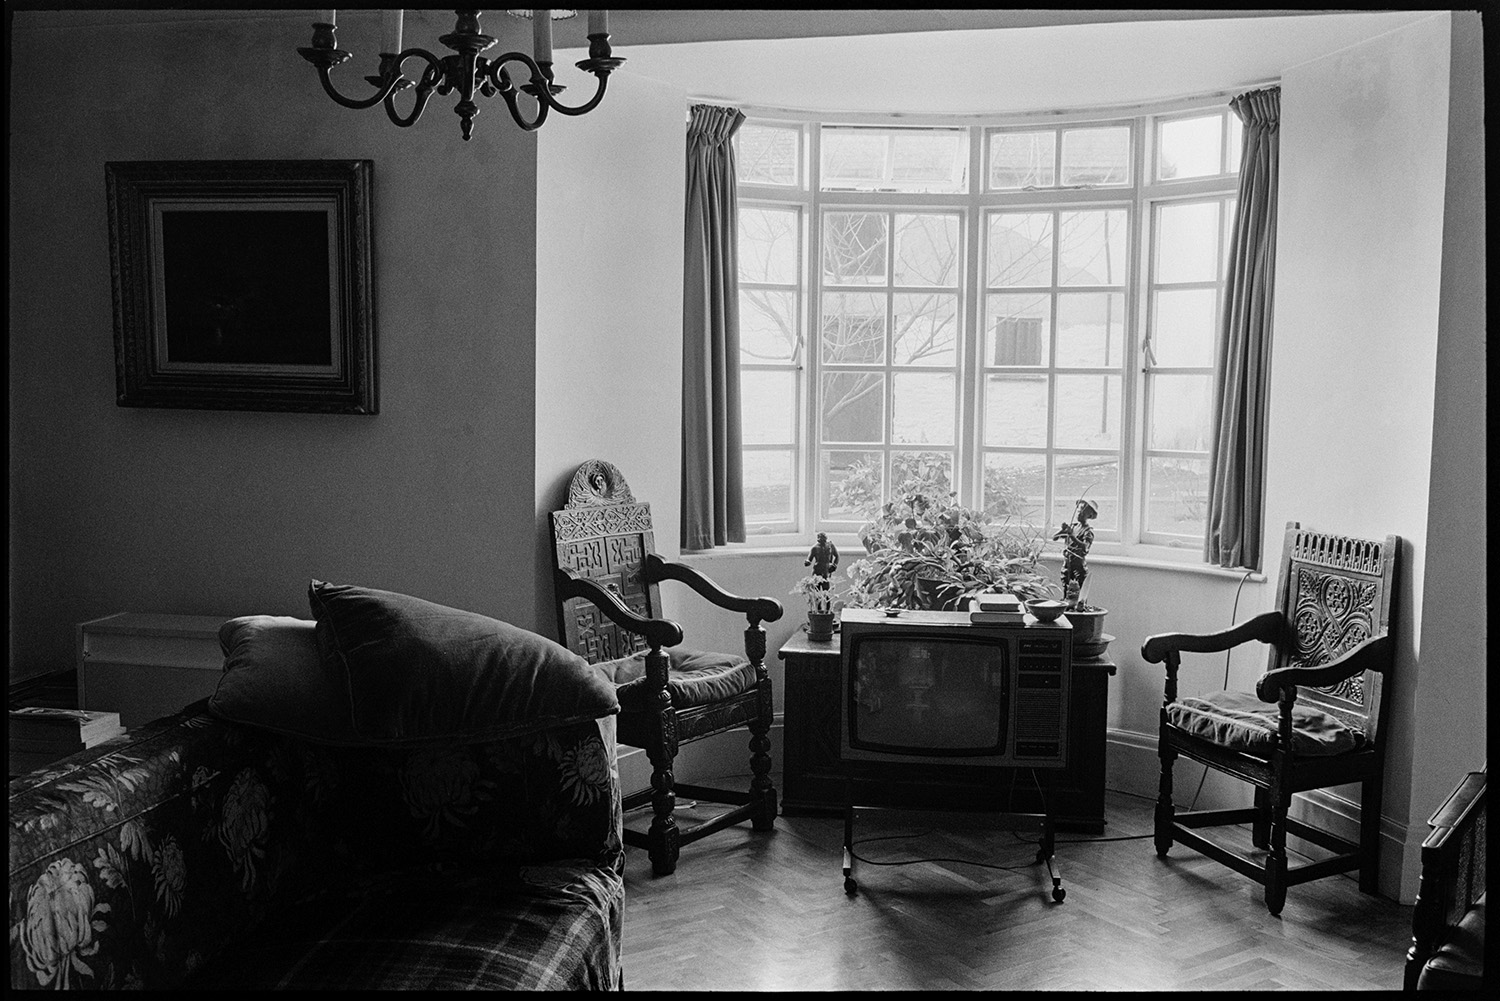 Man seated, smoking, furniture, china and paintings.
[Interior of a room in a house in Dolton, belonging to Michael Davis, showing a painting, two carved wooden chairs, a sofa and a television set, in front of a bay window.]